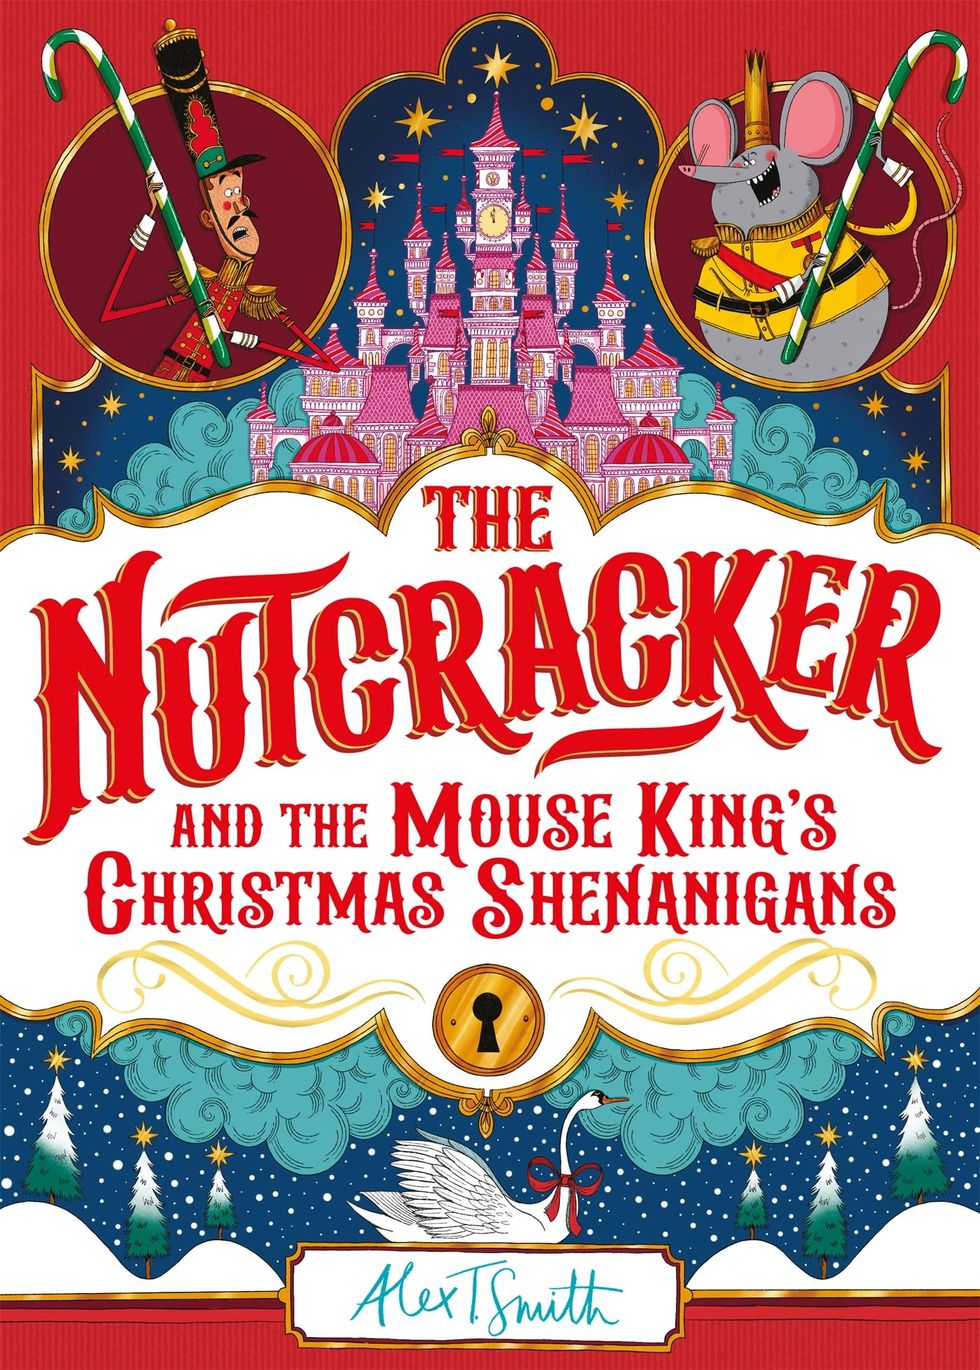 The Nutcracker And the Mouse King's Christmas Shenanigans by Alex T Smith